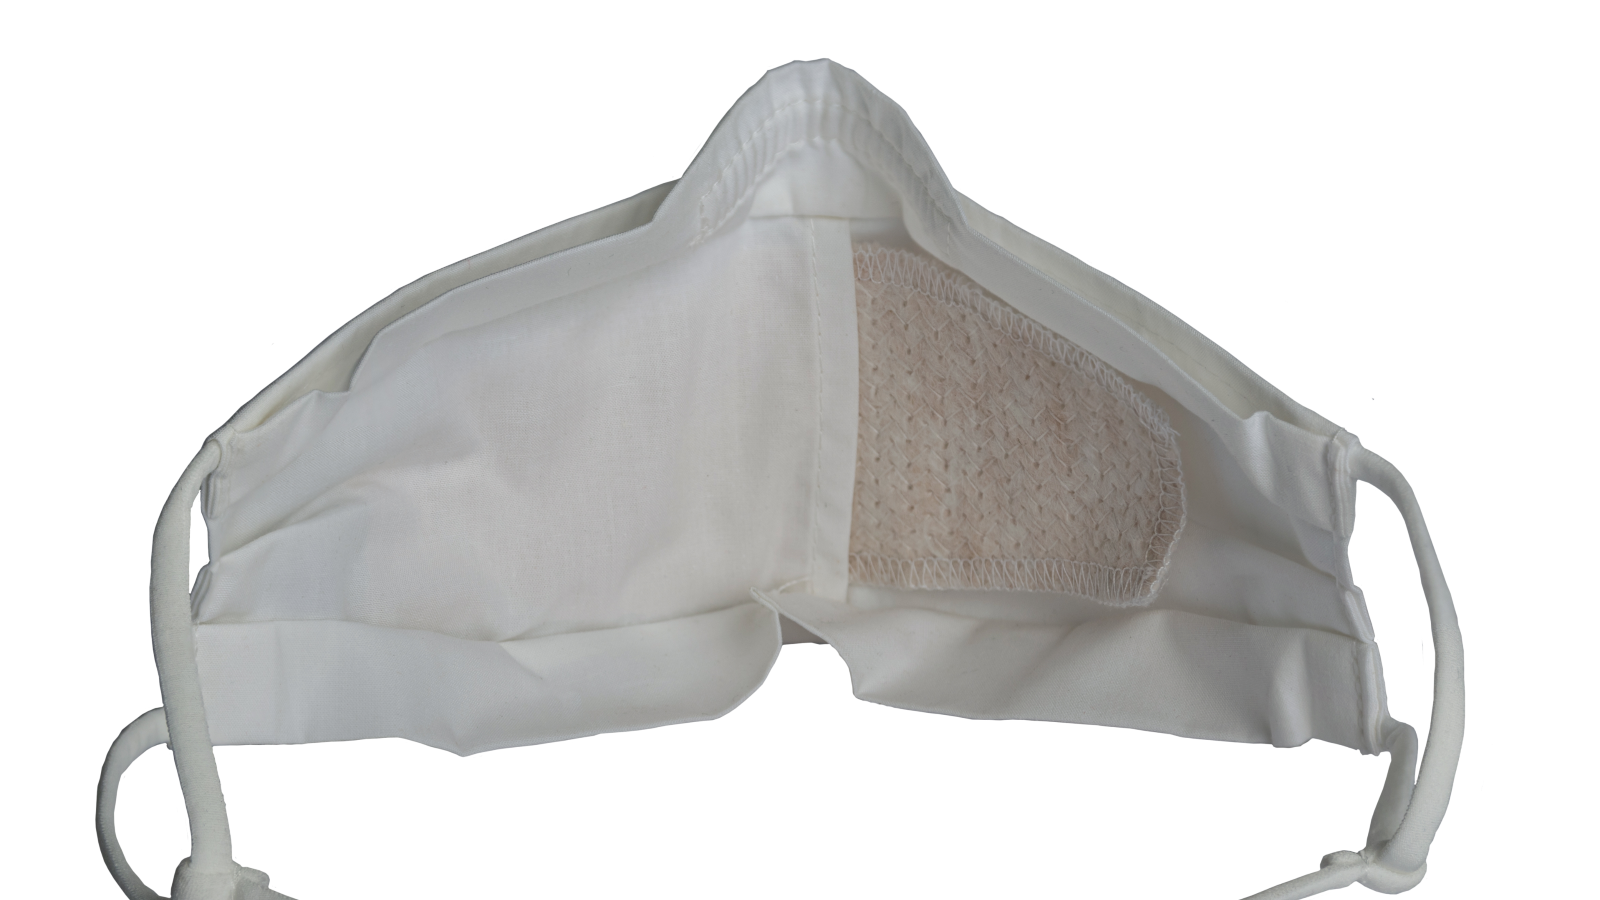 Ofertex’s reusable facemask features an antimicrobial filter fabric made from recycled textiles. Photo: courtesy